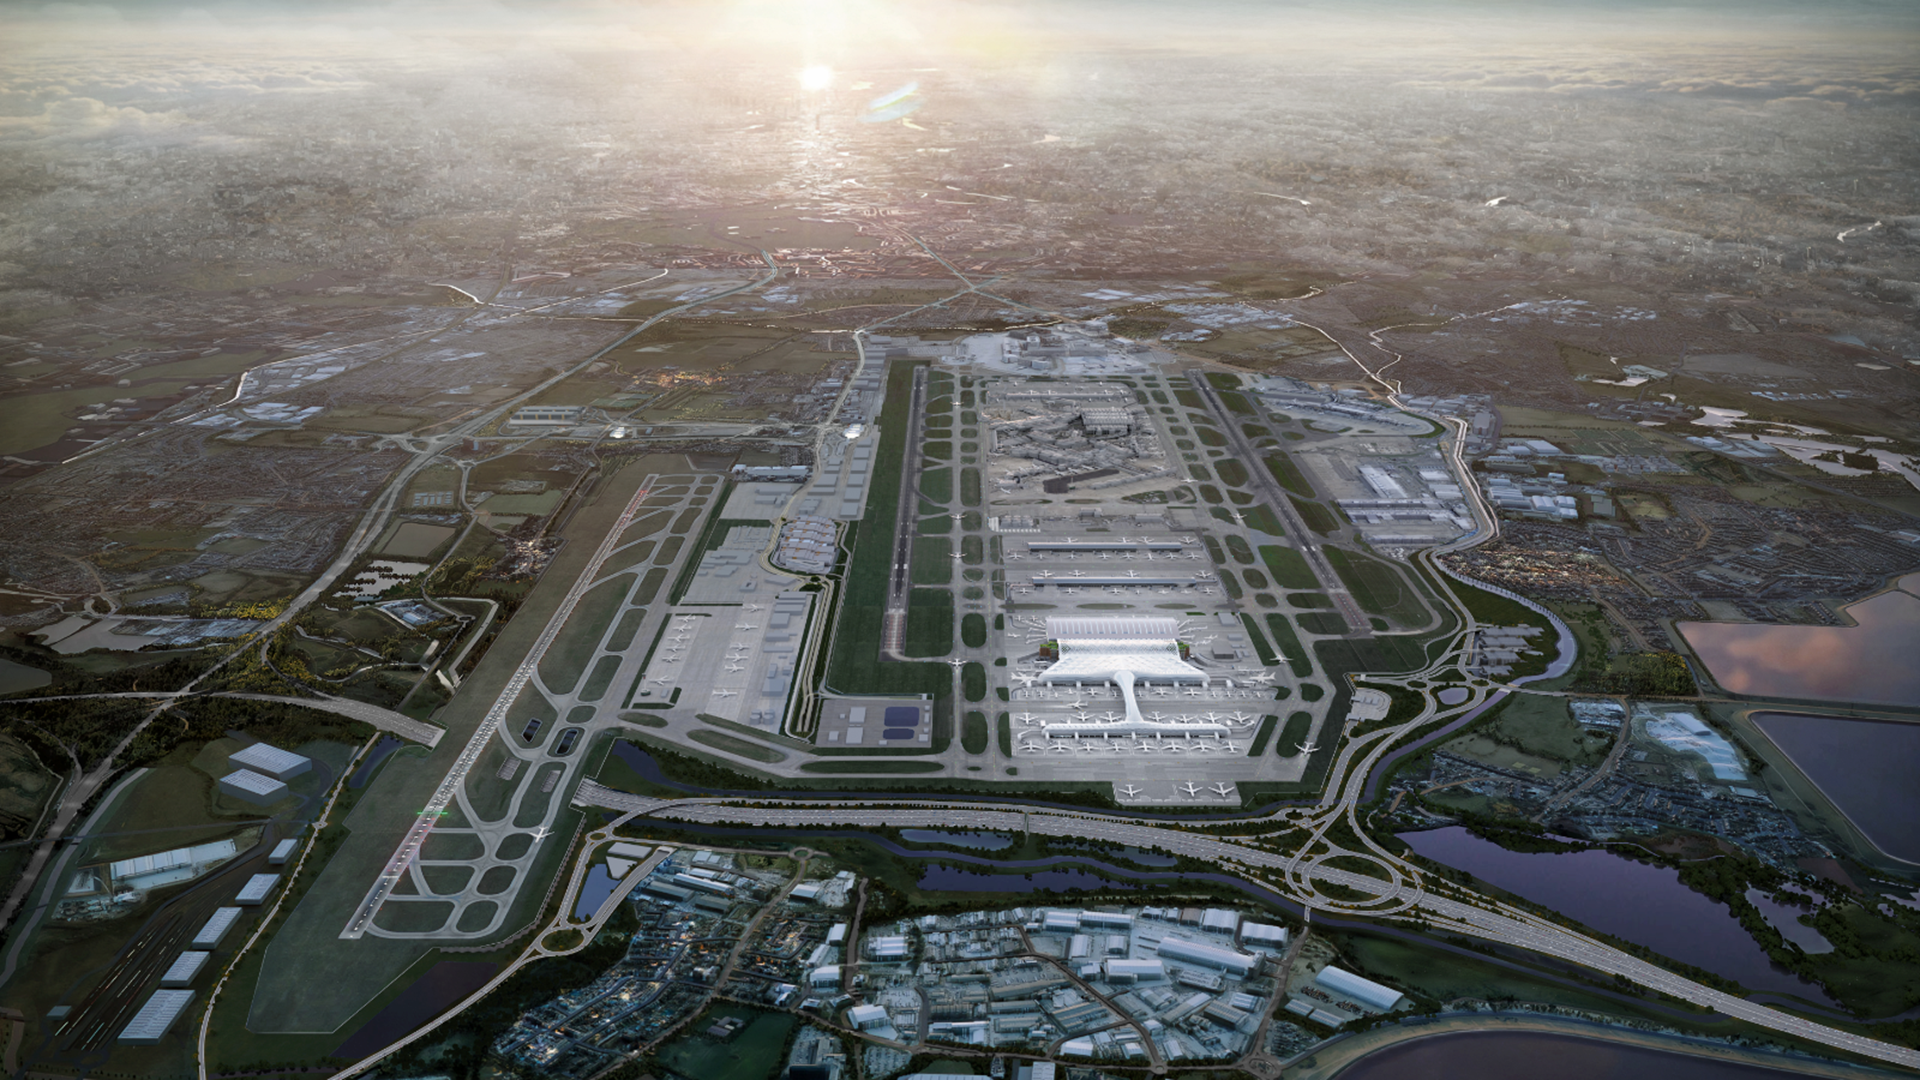 Above: Scott Brownrigg proposals for the expansion at Heathrow West for The Arora Group